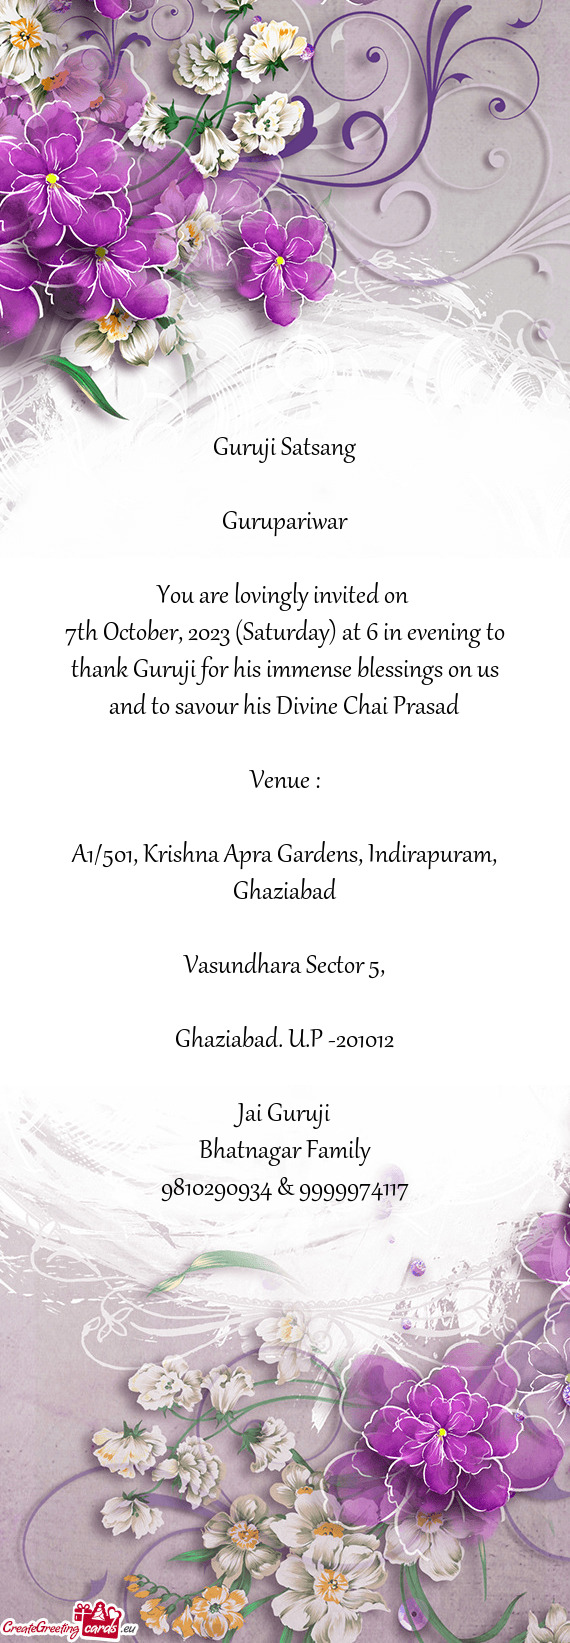 7th October, 2023 (Saturday) at 6 in evening to thank Guruji for his immense blessings on us